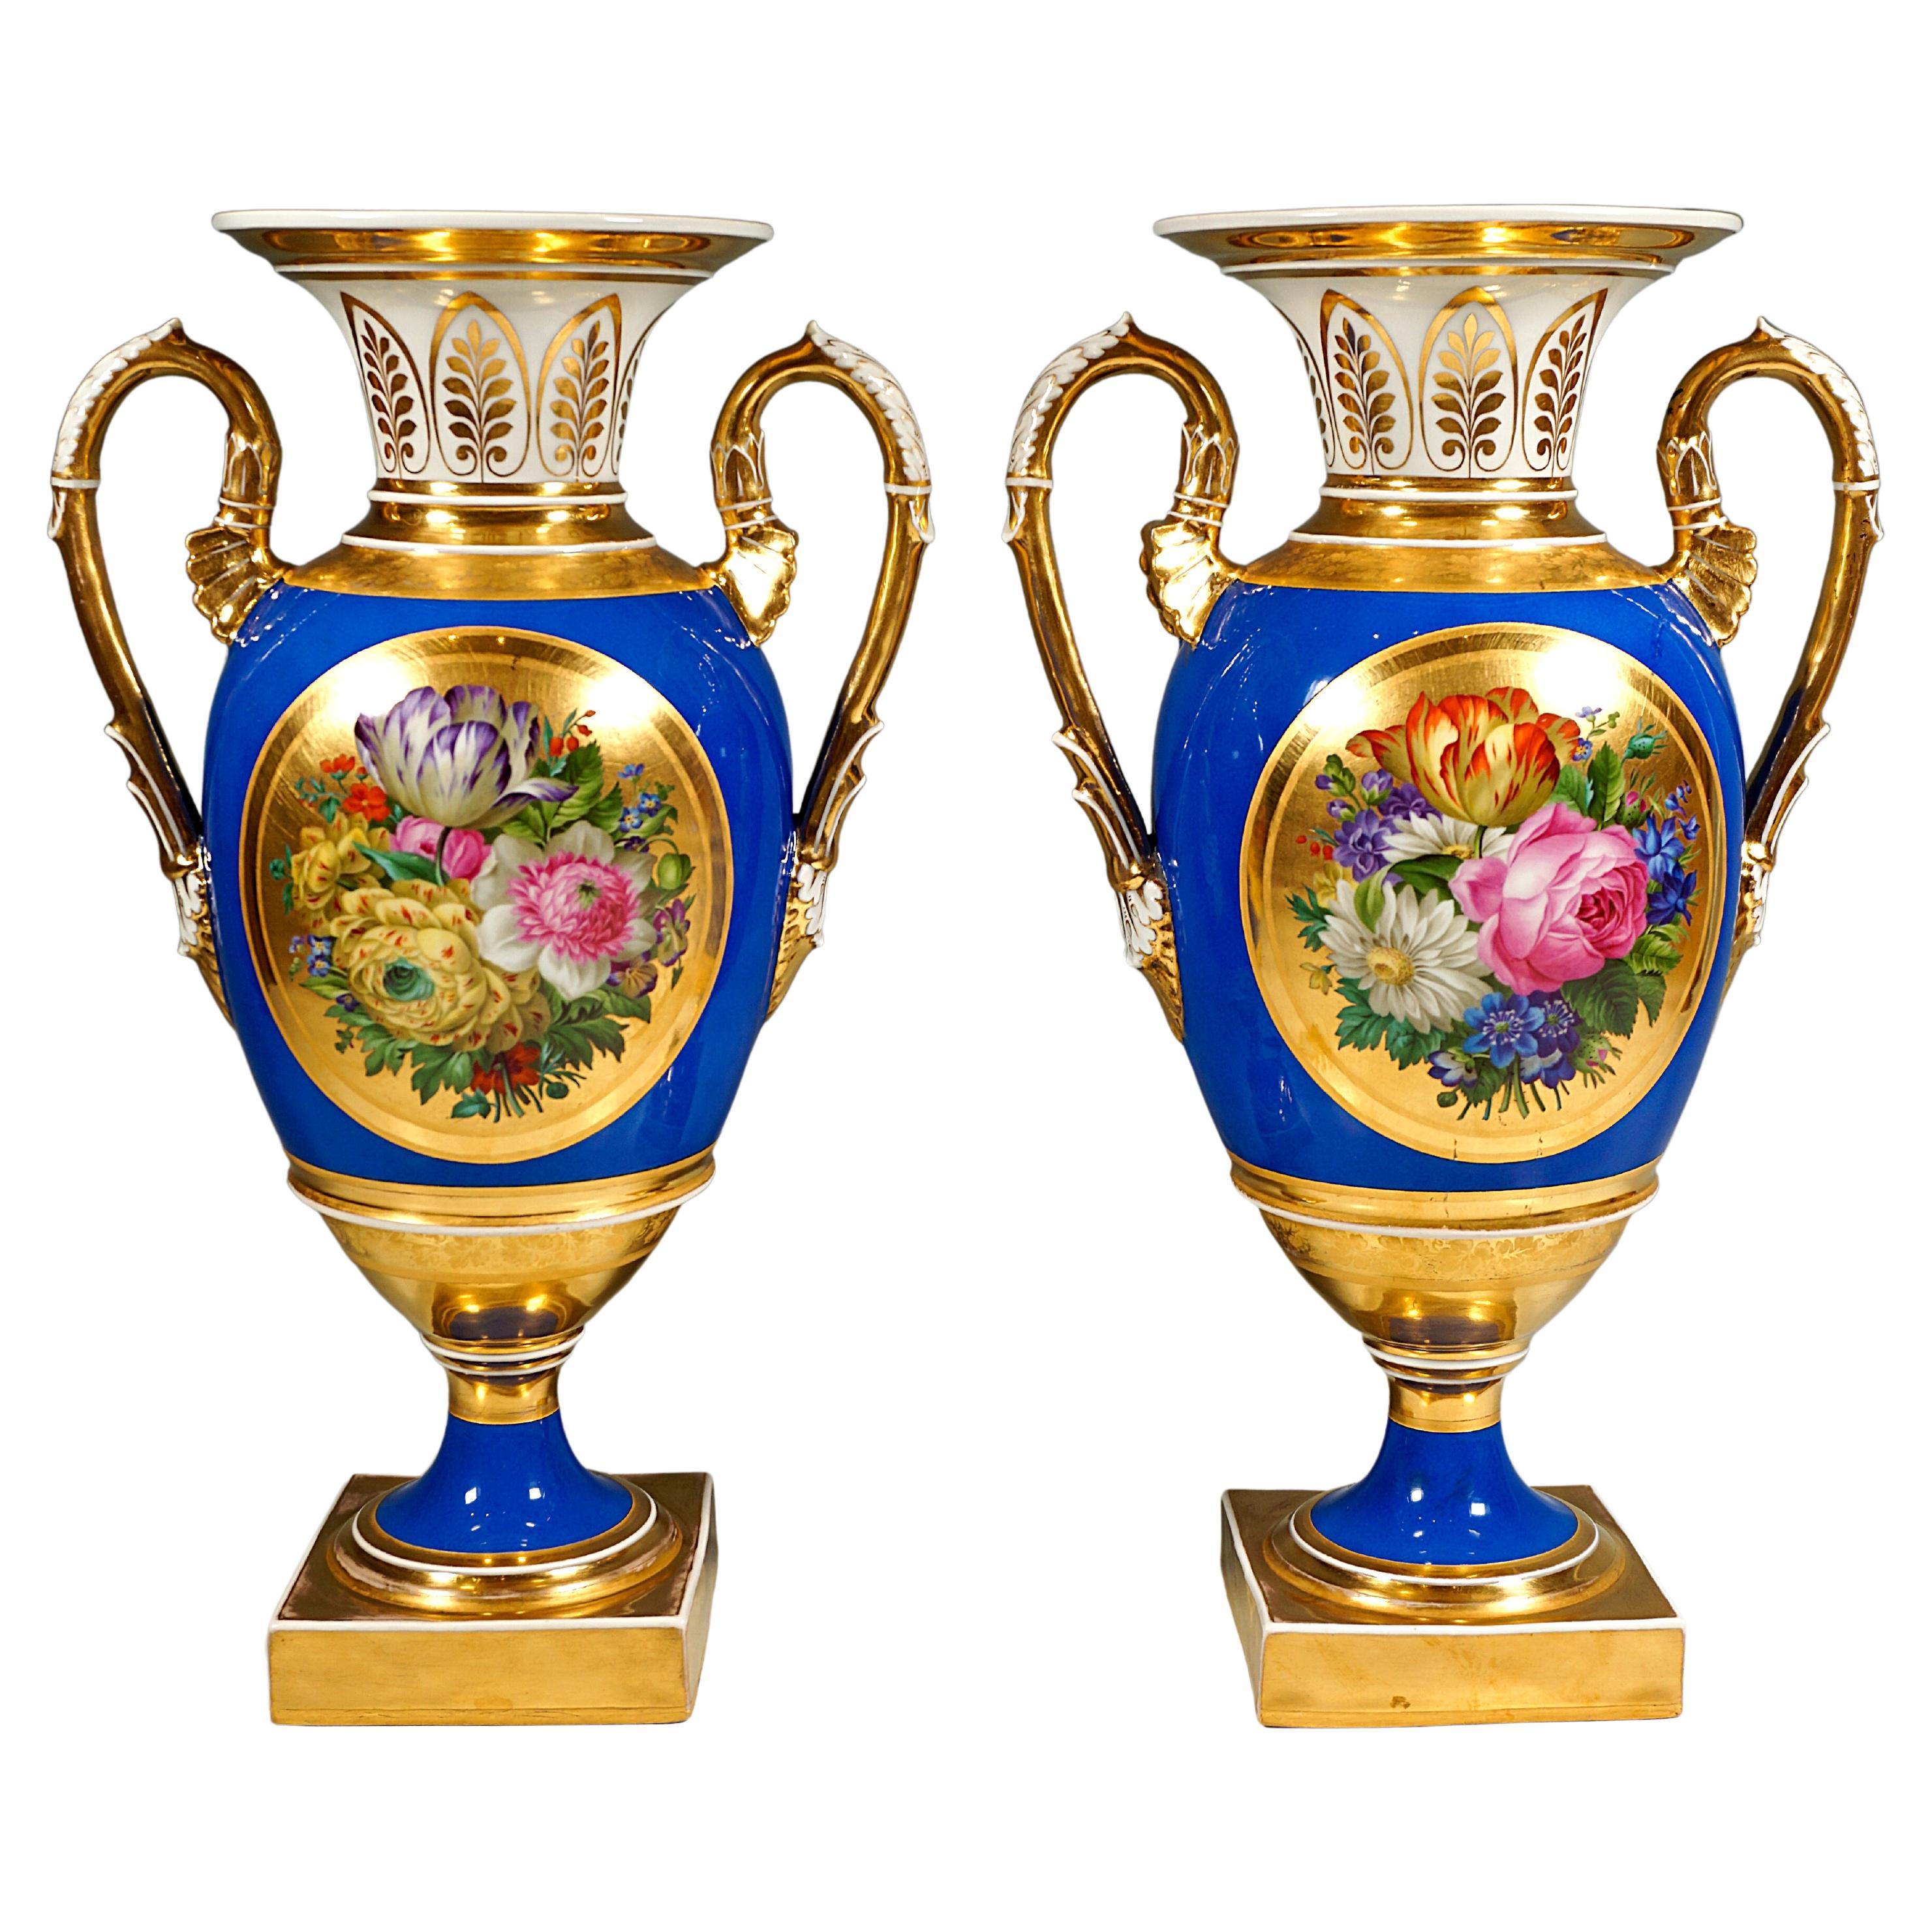 Pair of Imperial Vienna Amphora Vases, Rich Bouquet Painting, Leopold Lieb 1828